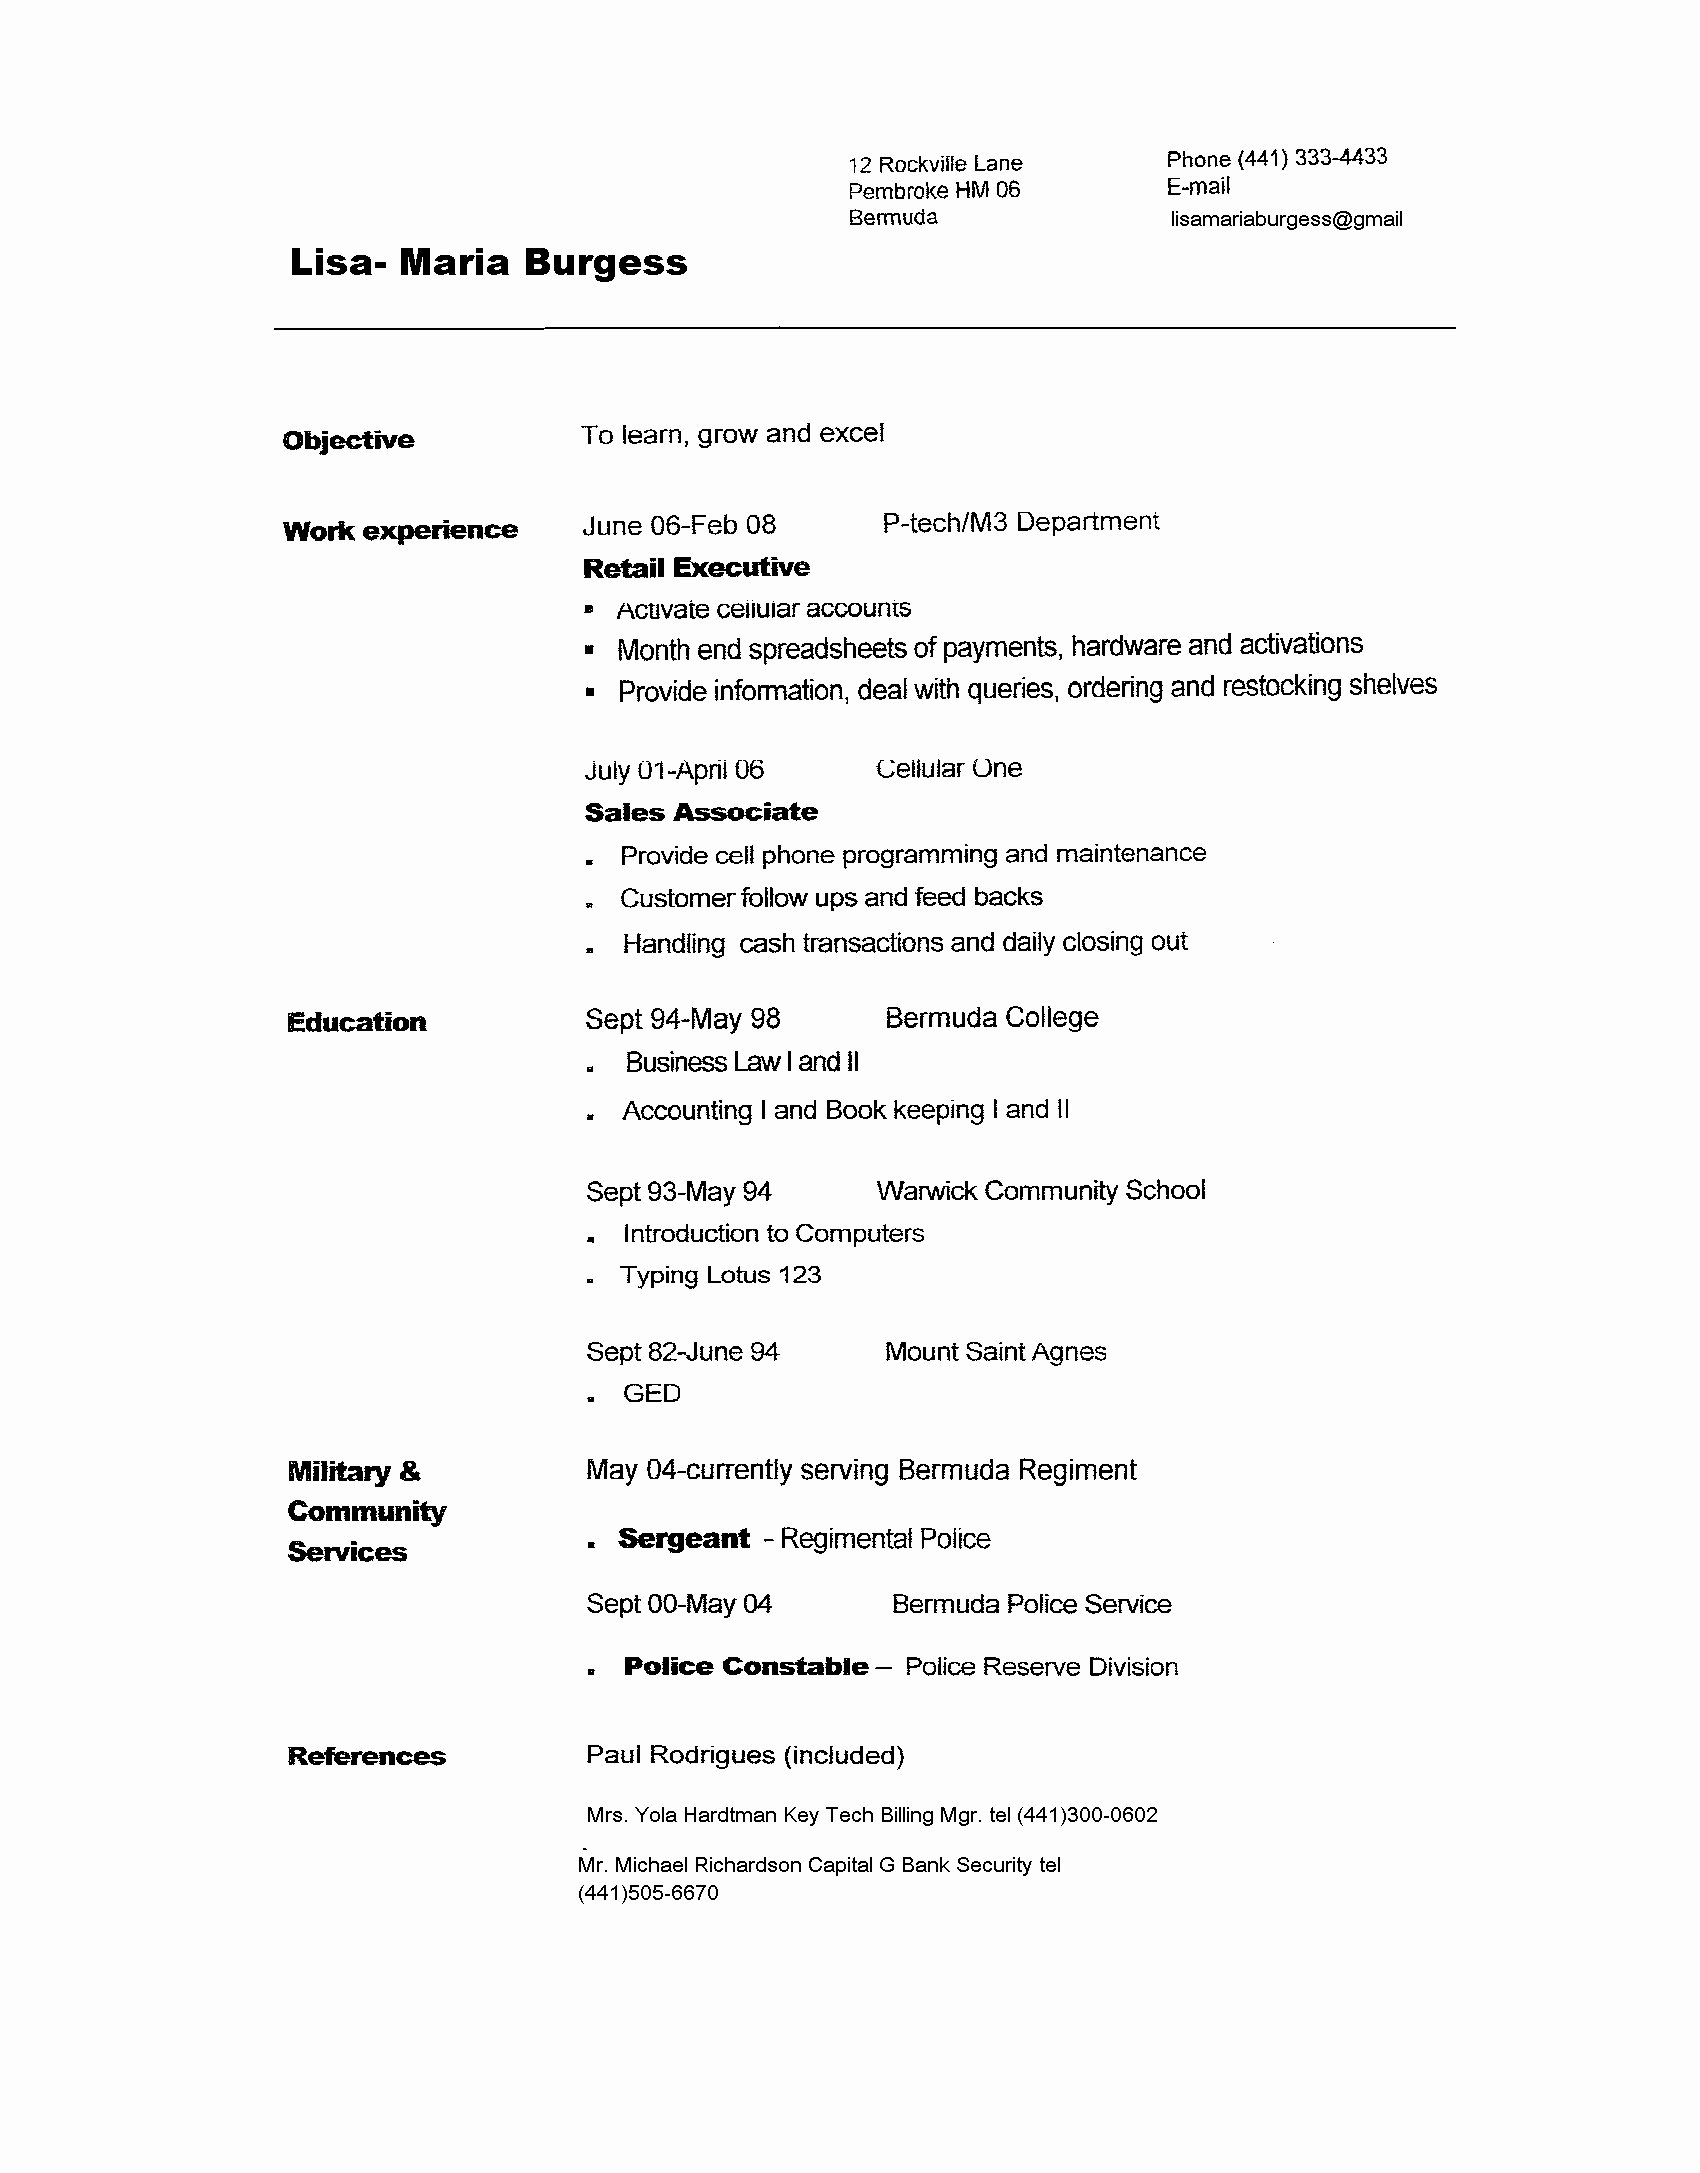 Resume format Resume Samples to Copy and Paste